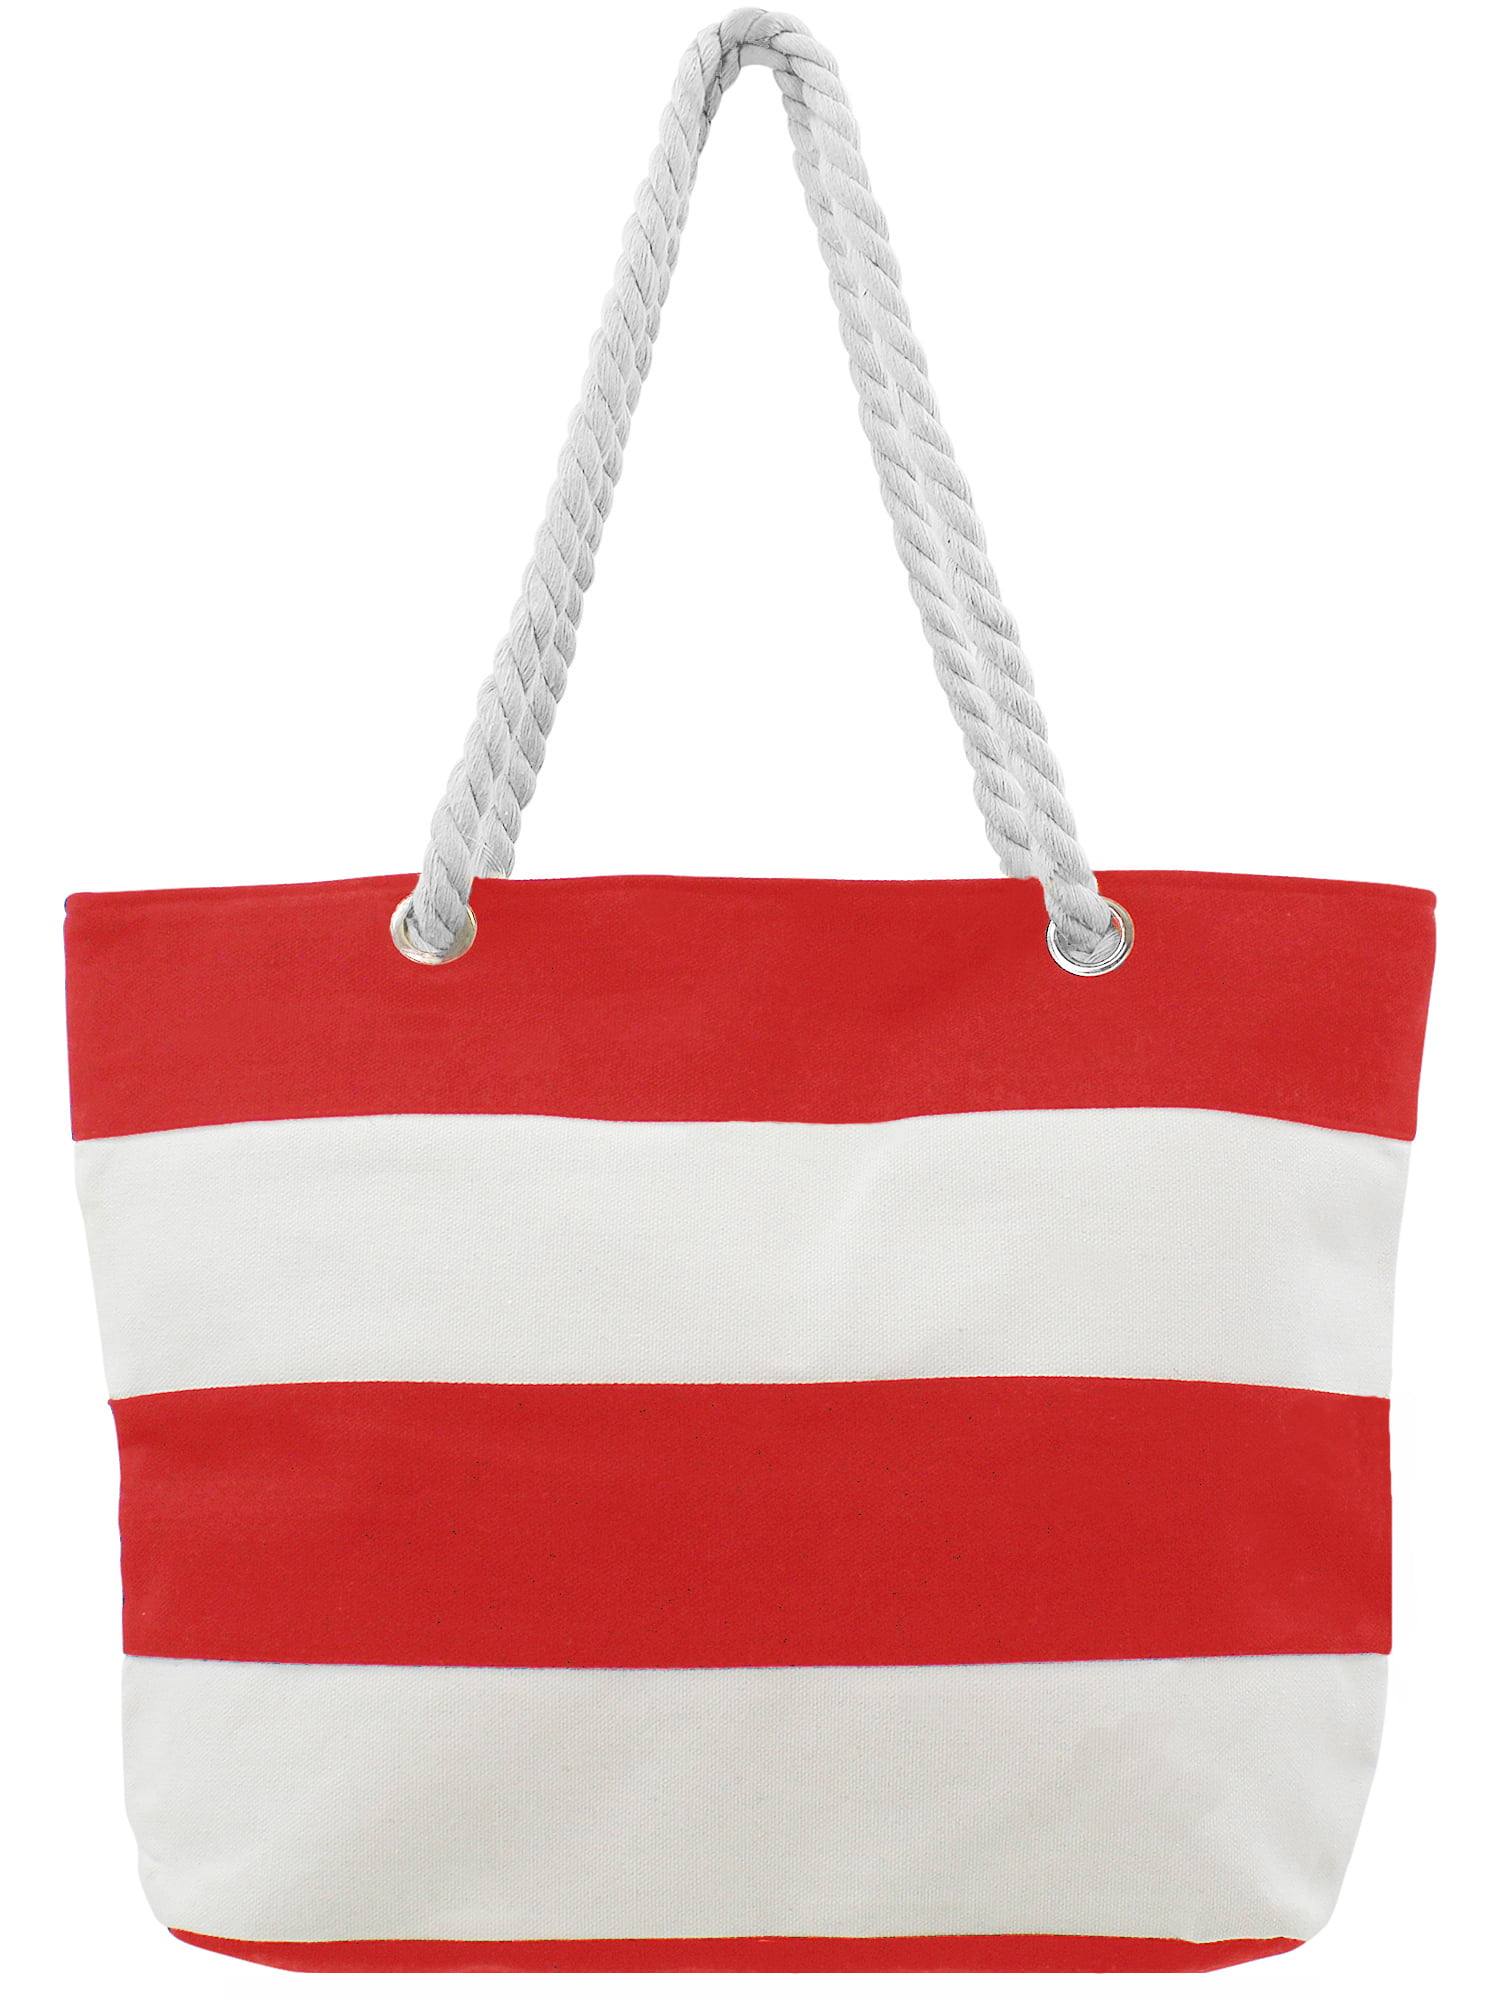 Lux Accessories Women's Small Red and White Stripe Tote Beach Bag